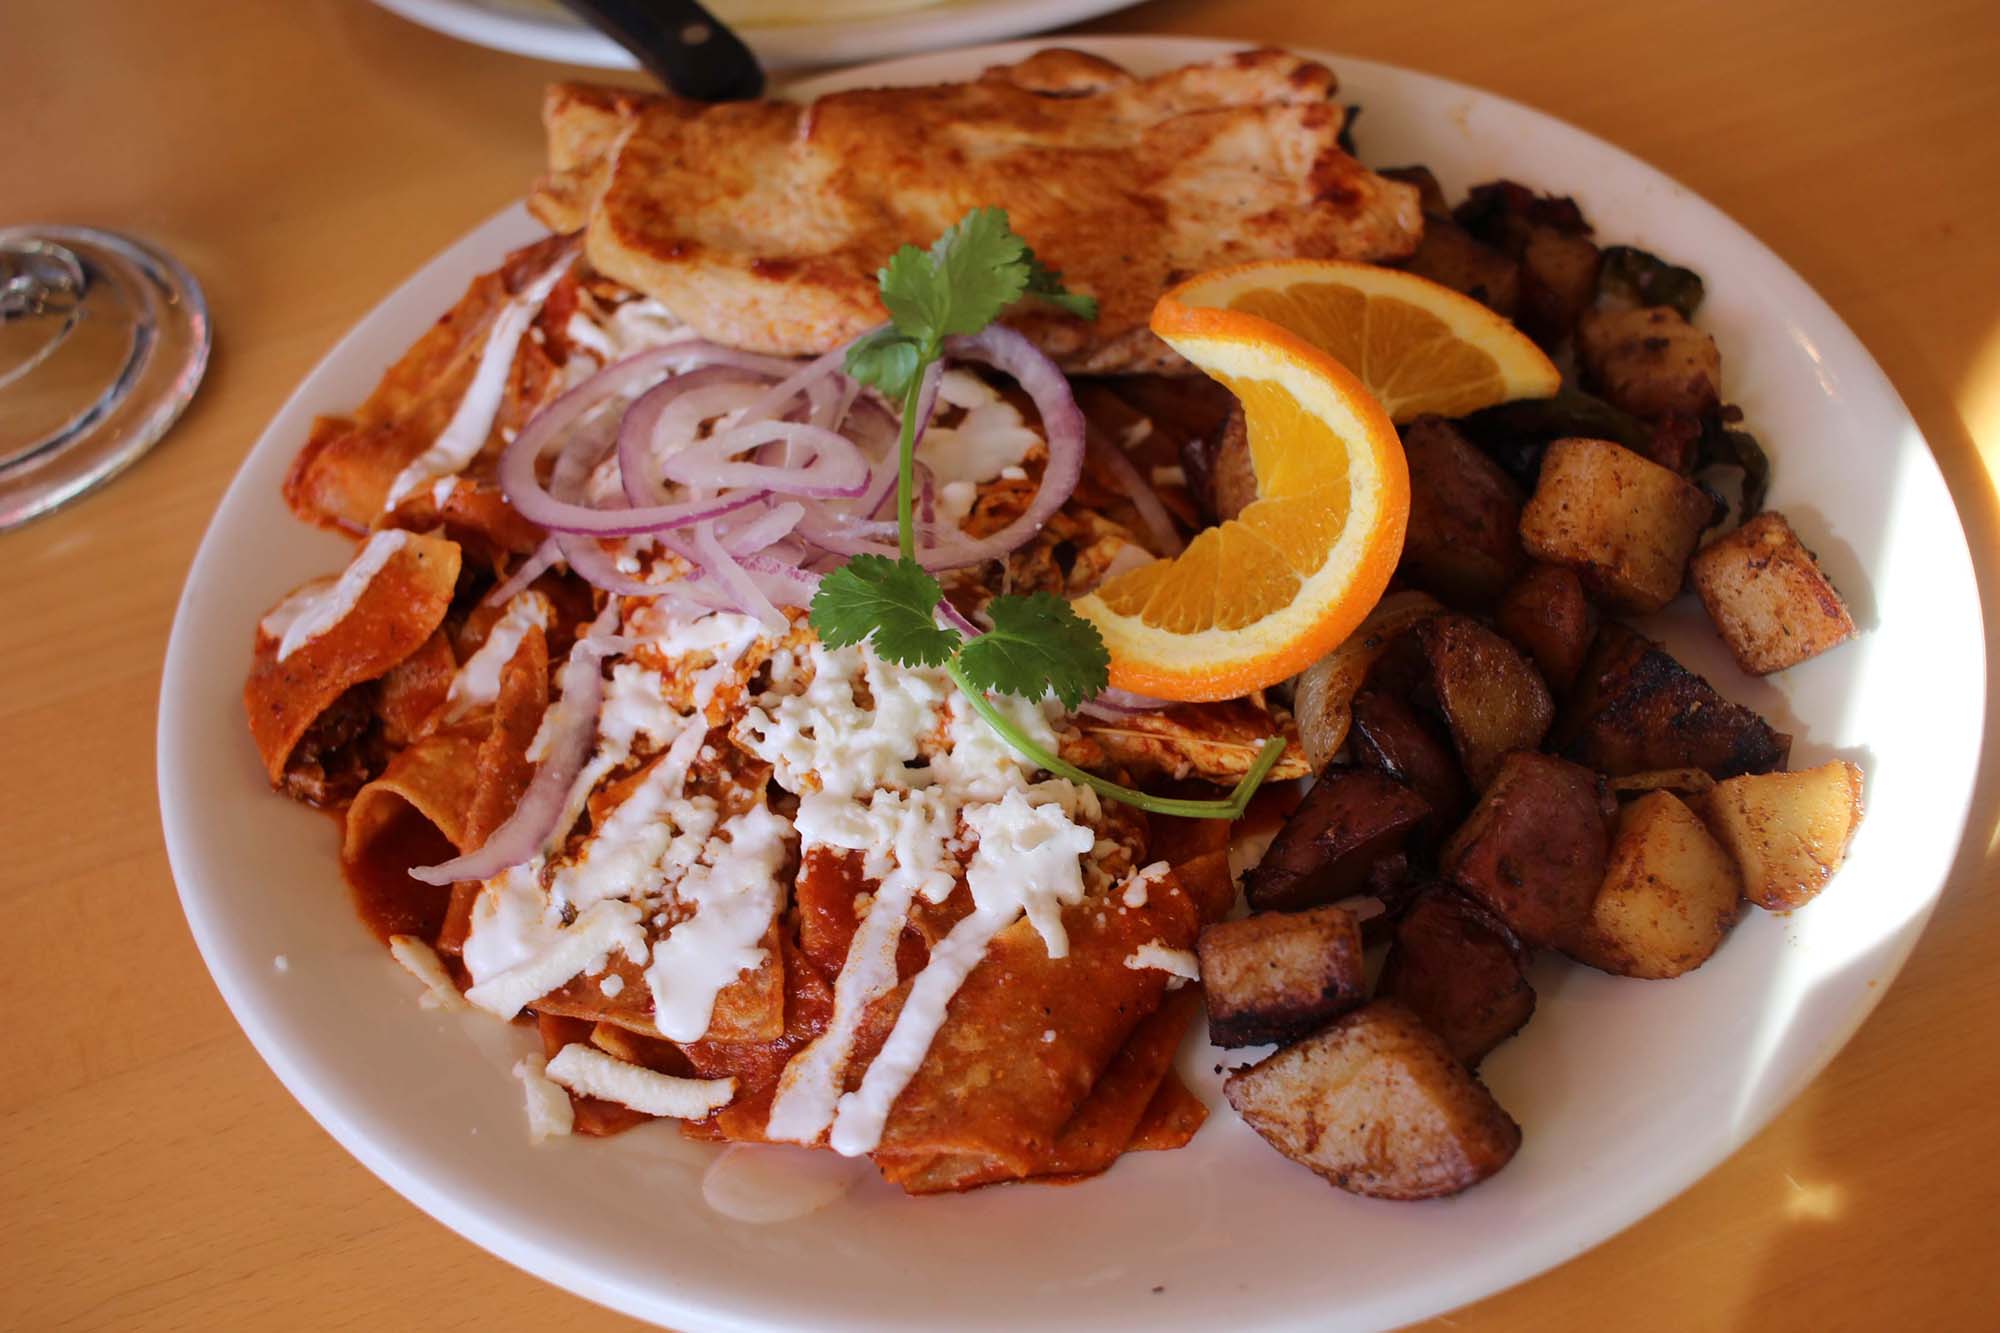 A plate of red chilaquiles with a side of breakfast potatoes.